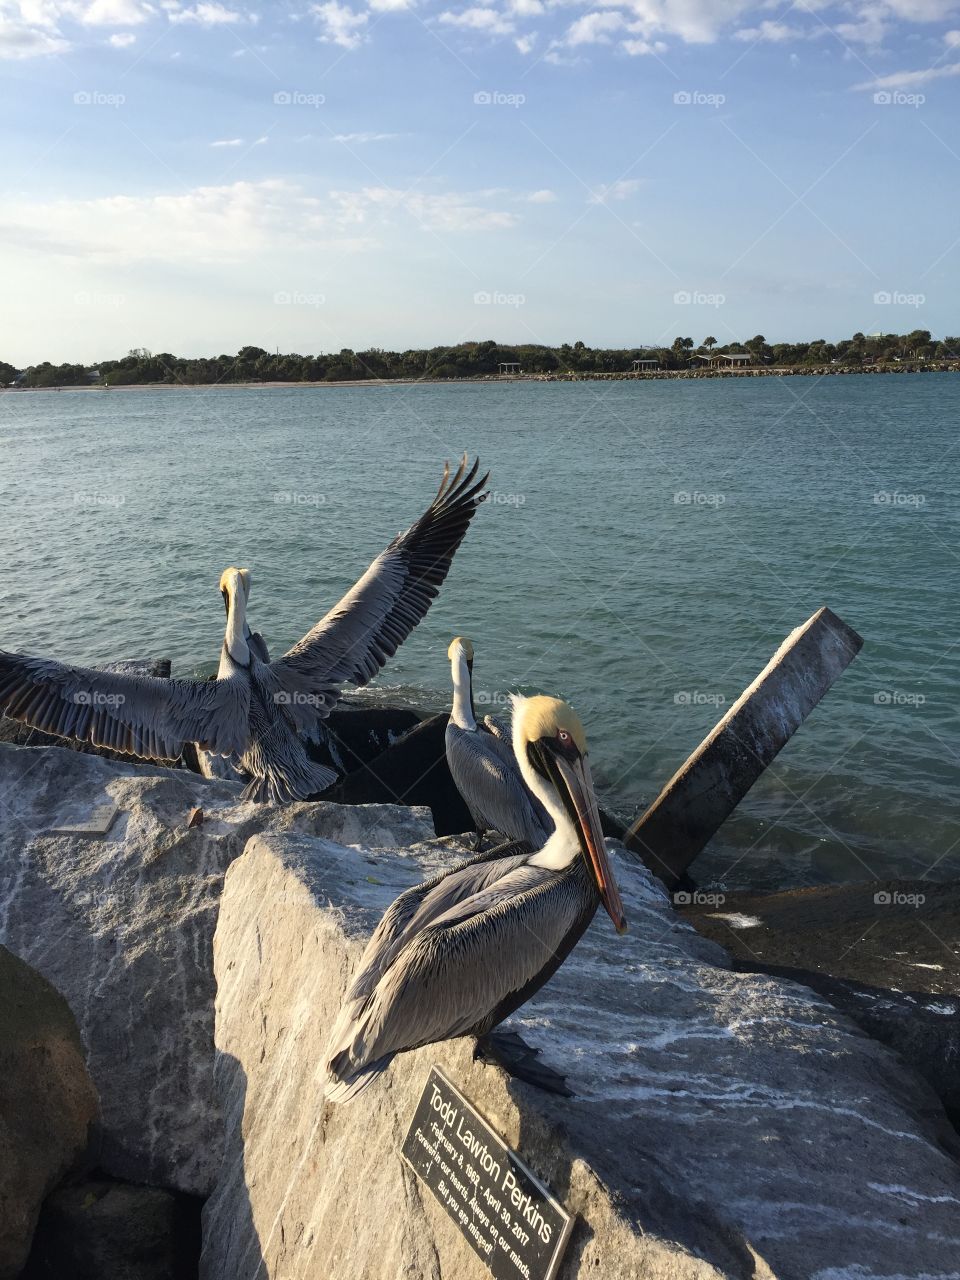 Water scene with pelicans on rocks